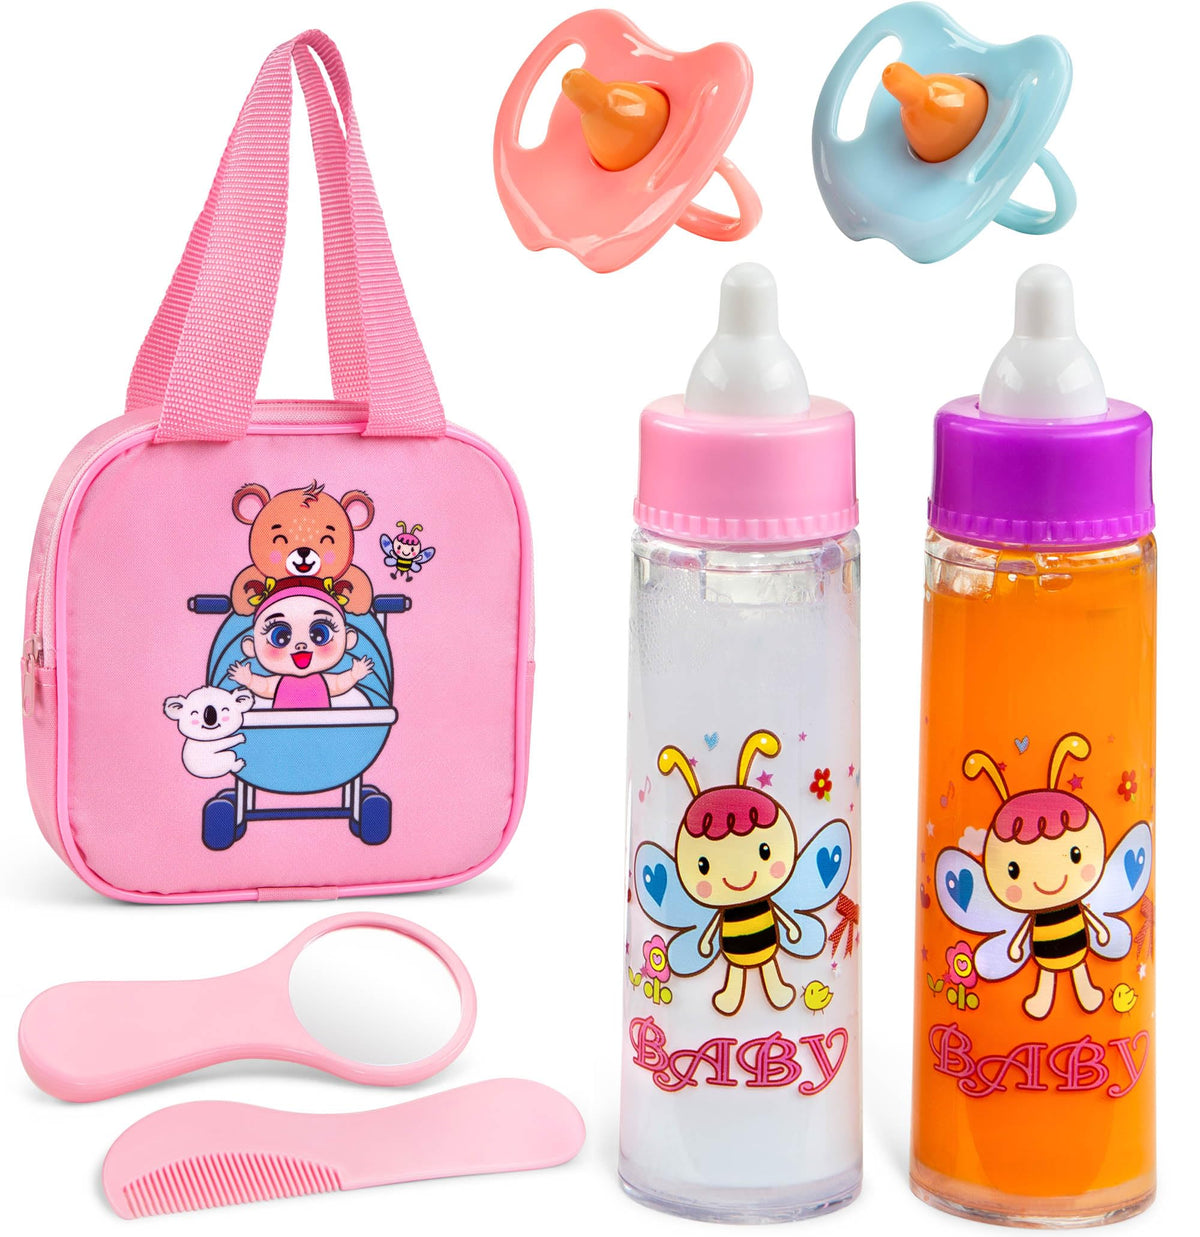 Baby Doll Set - 7 Piece Adorable Baby Doll Accessories with 2 Baby Doll Bottles, 2 Doll Pacifiers, Comb and Mirror - Baby Doll Toys for Kids in a Cute Bag with Handle - Disappearing Baby Doll Bottle